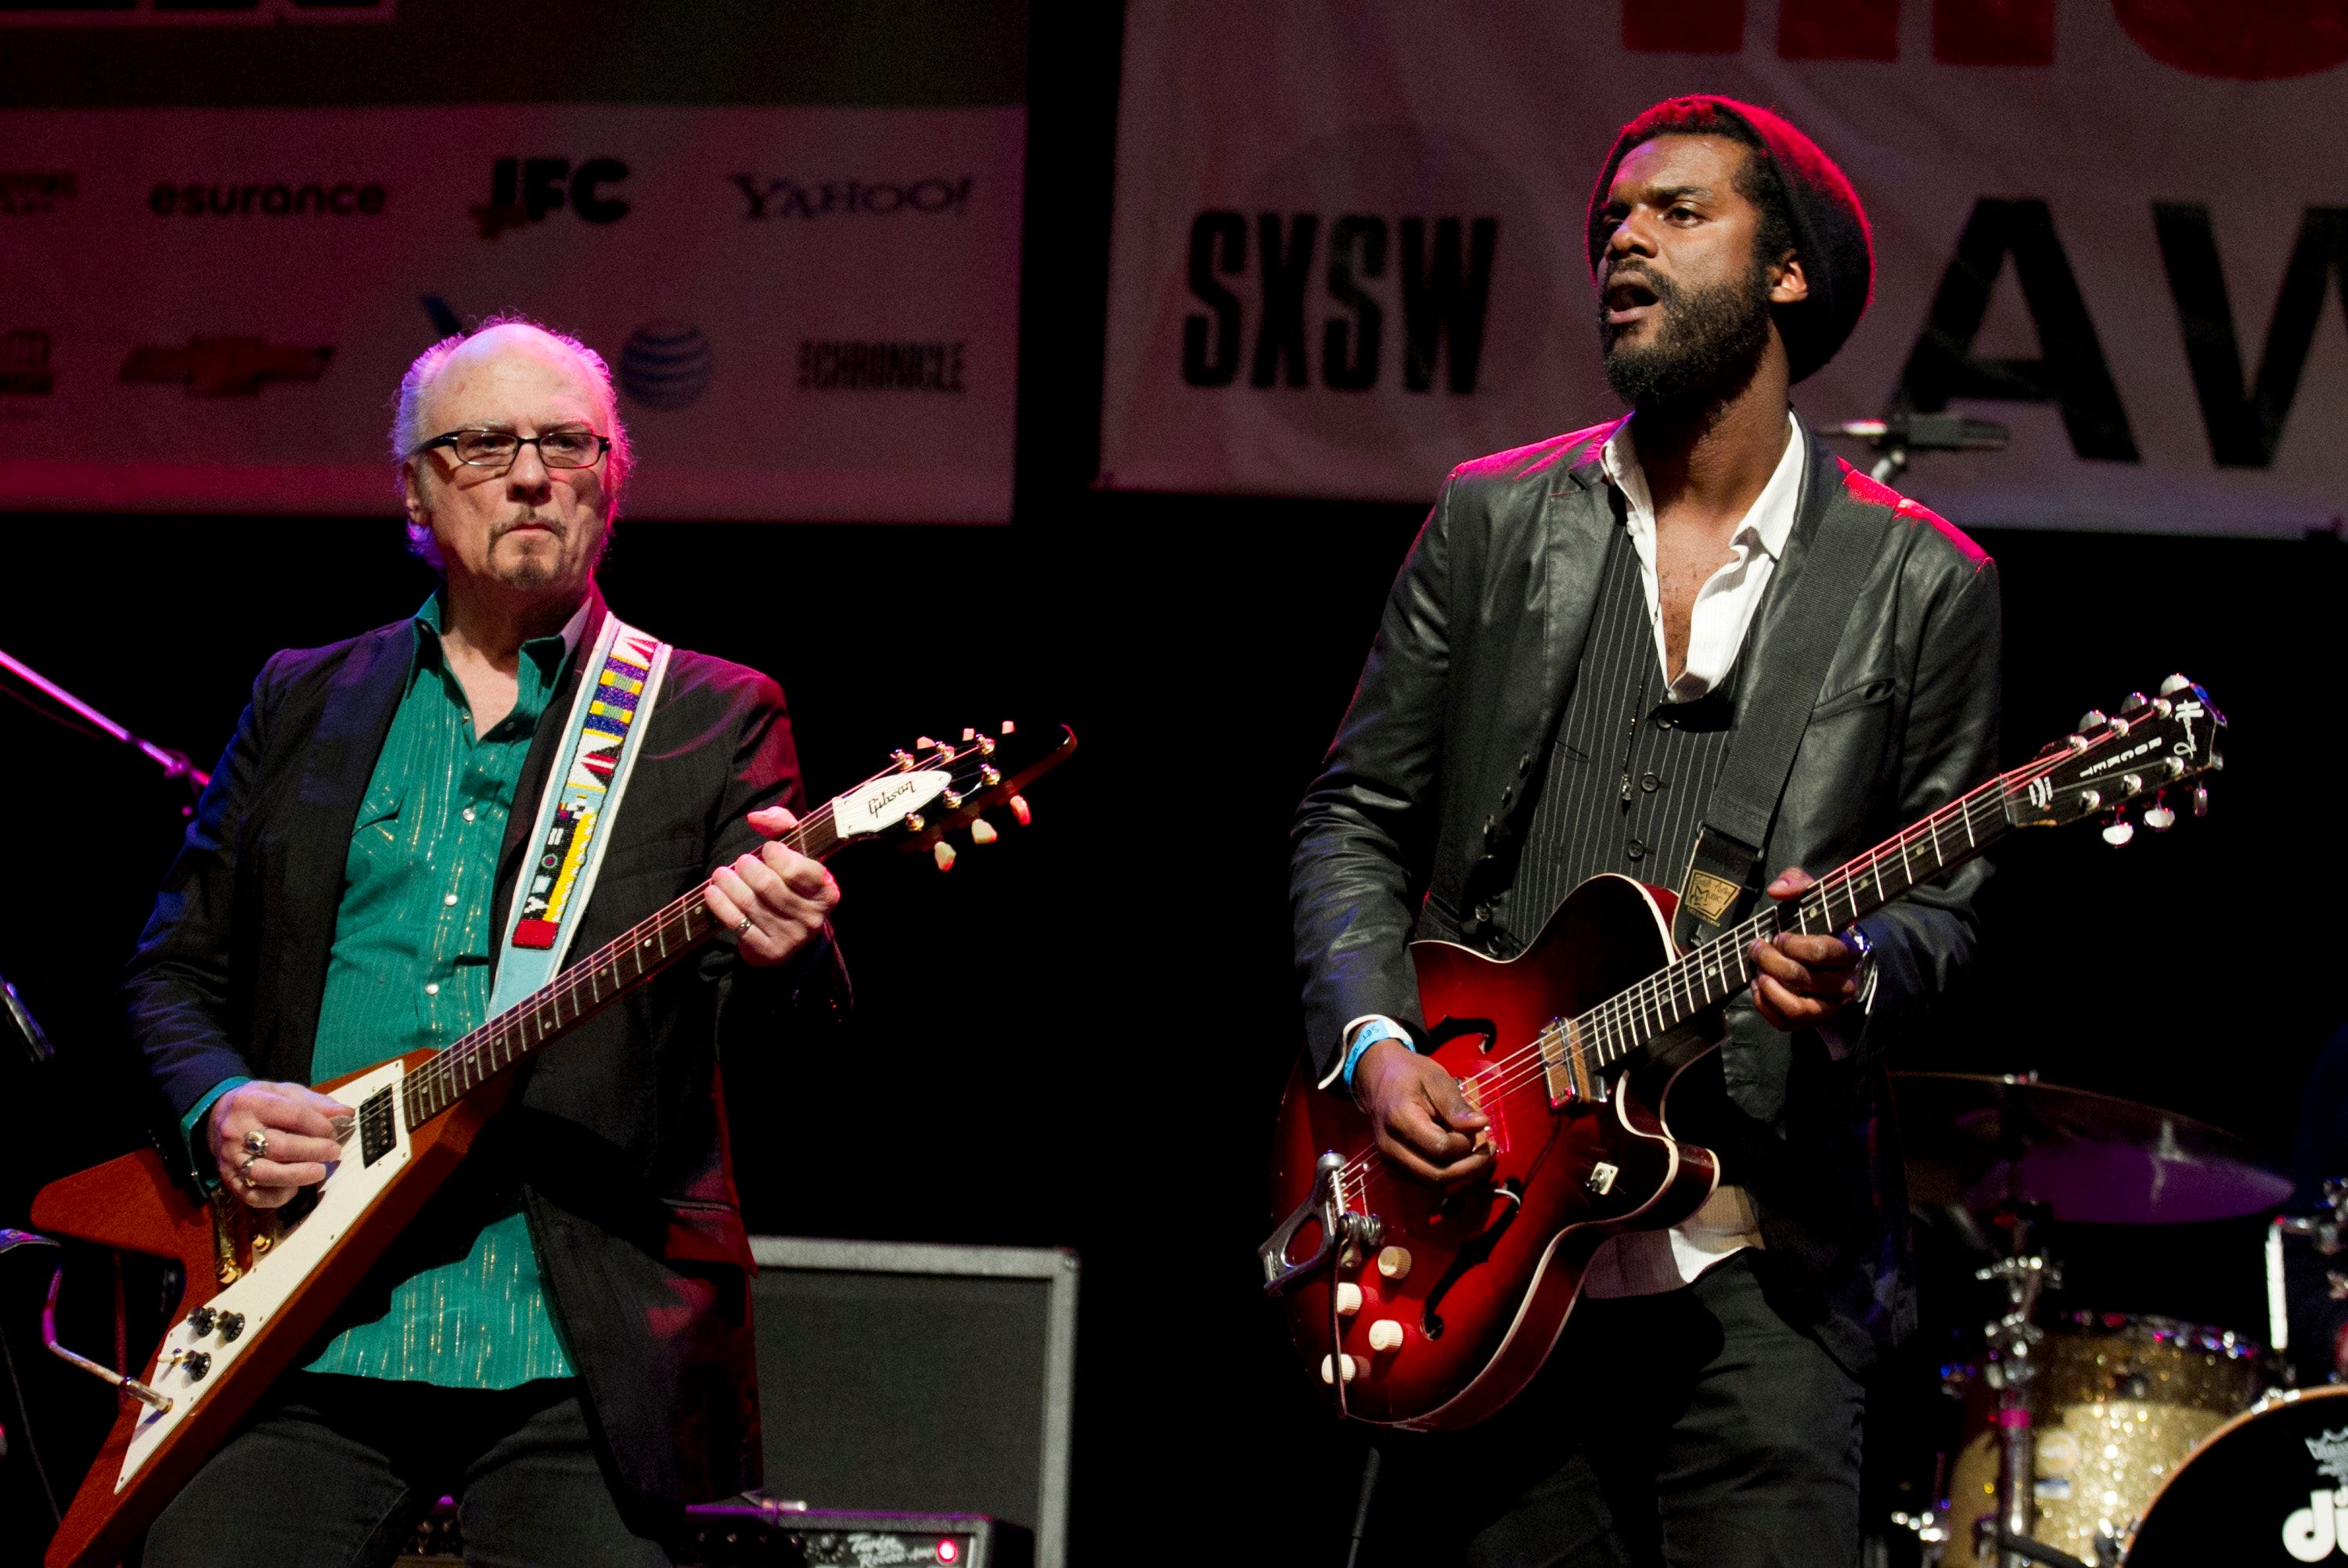 Denny Freeman onstage with Gary Clark Jr. at the Austin Music Awards ceremony in 2013.